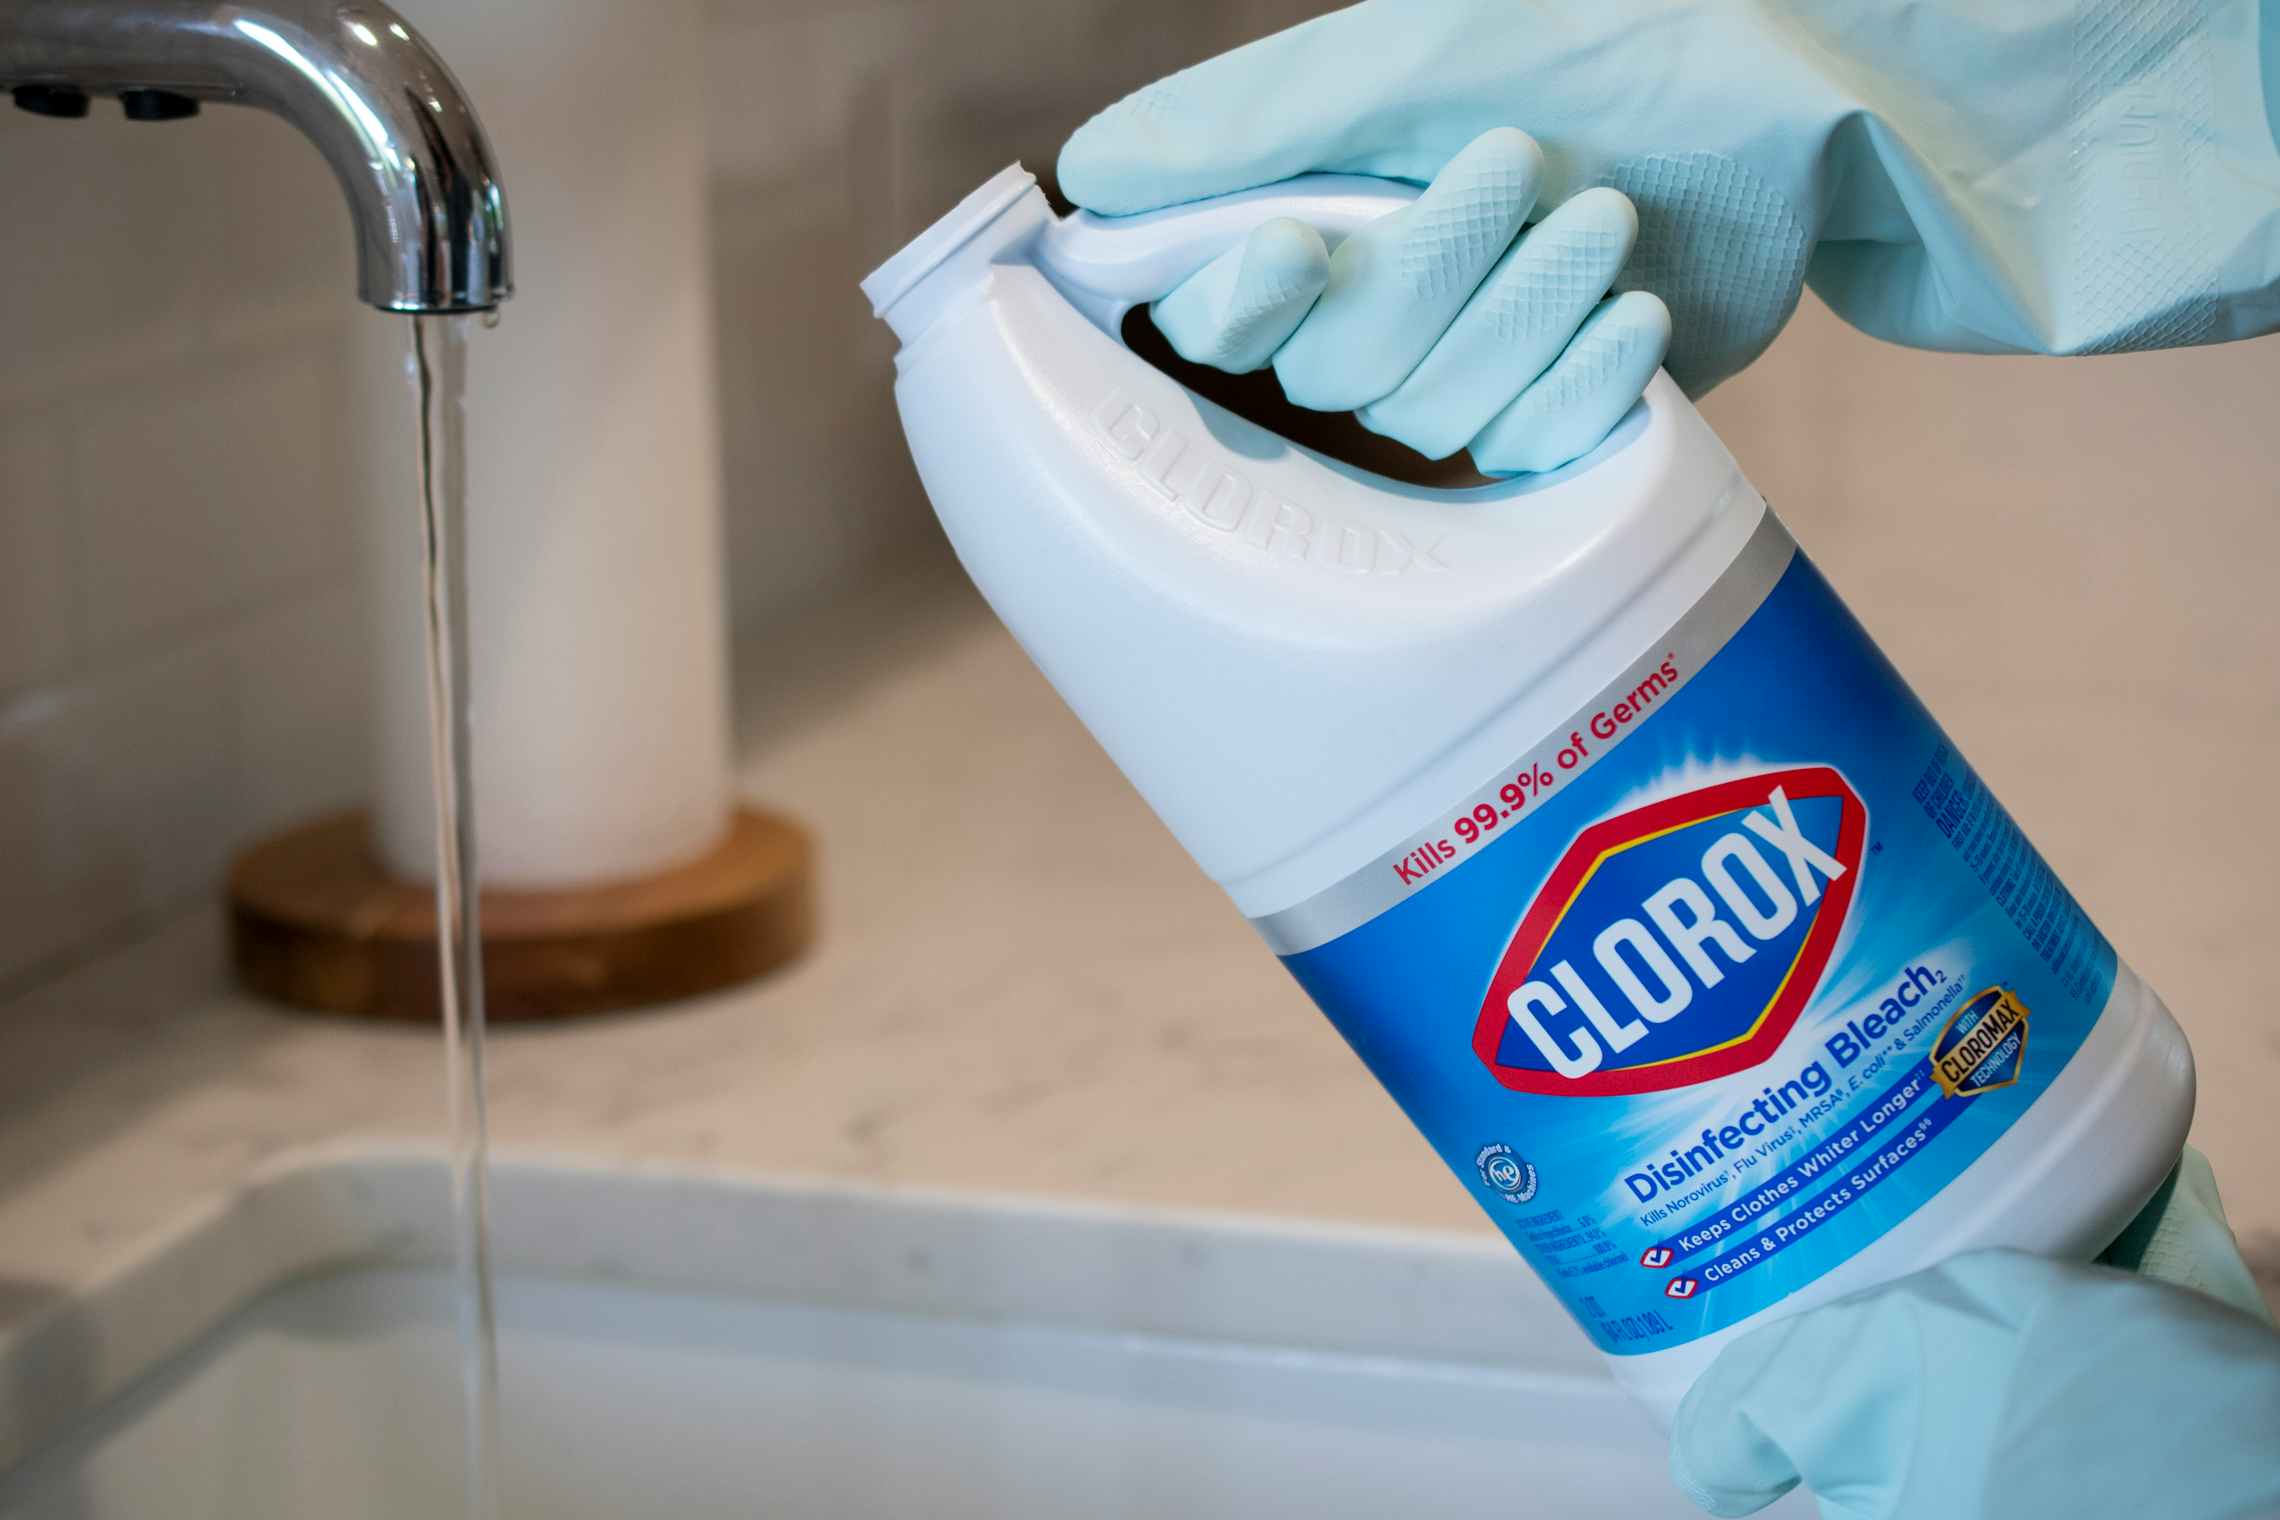 A person holding a bottle of Clorox bleach next to a sink with the tap running while wearing rubber dish gloves.